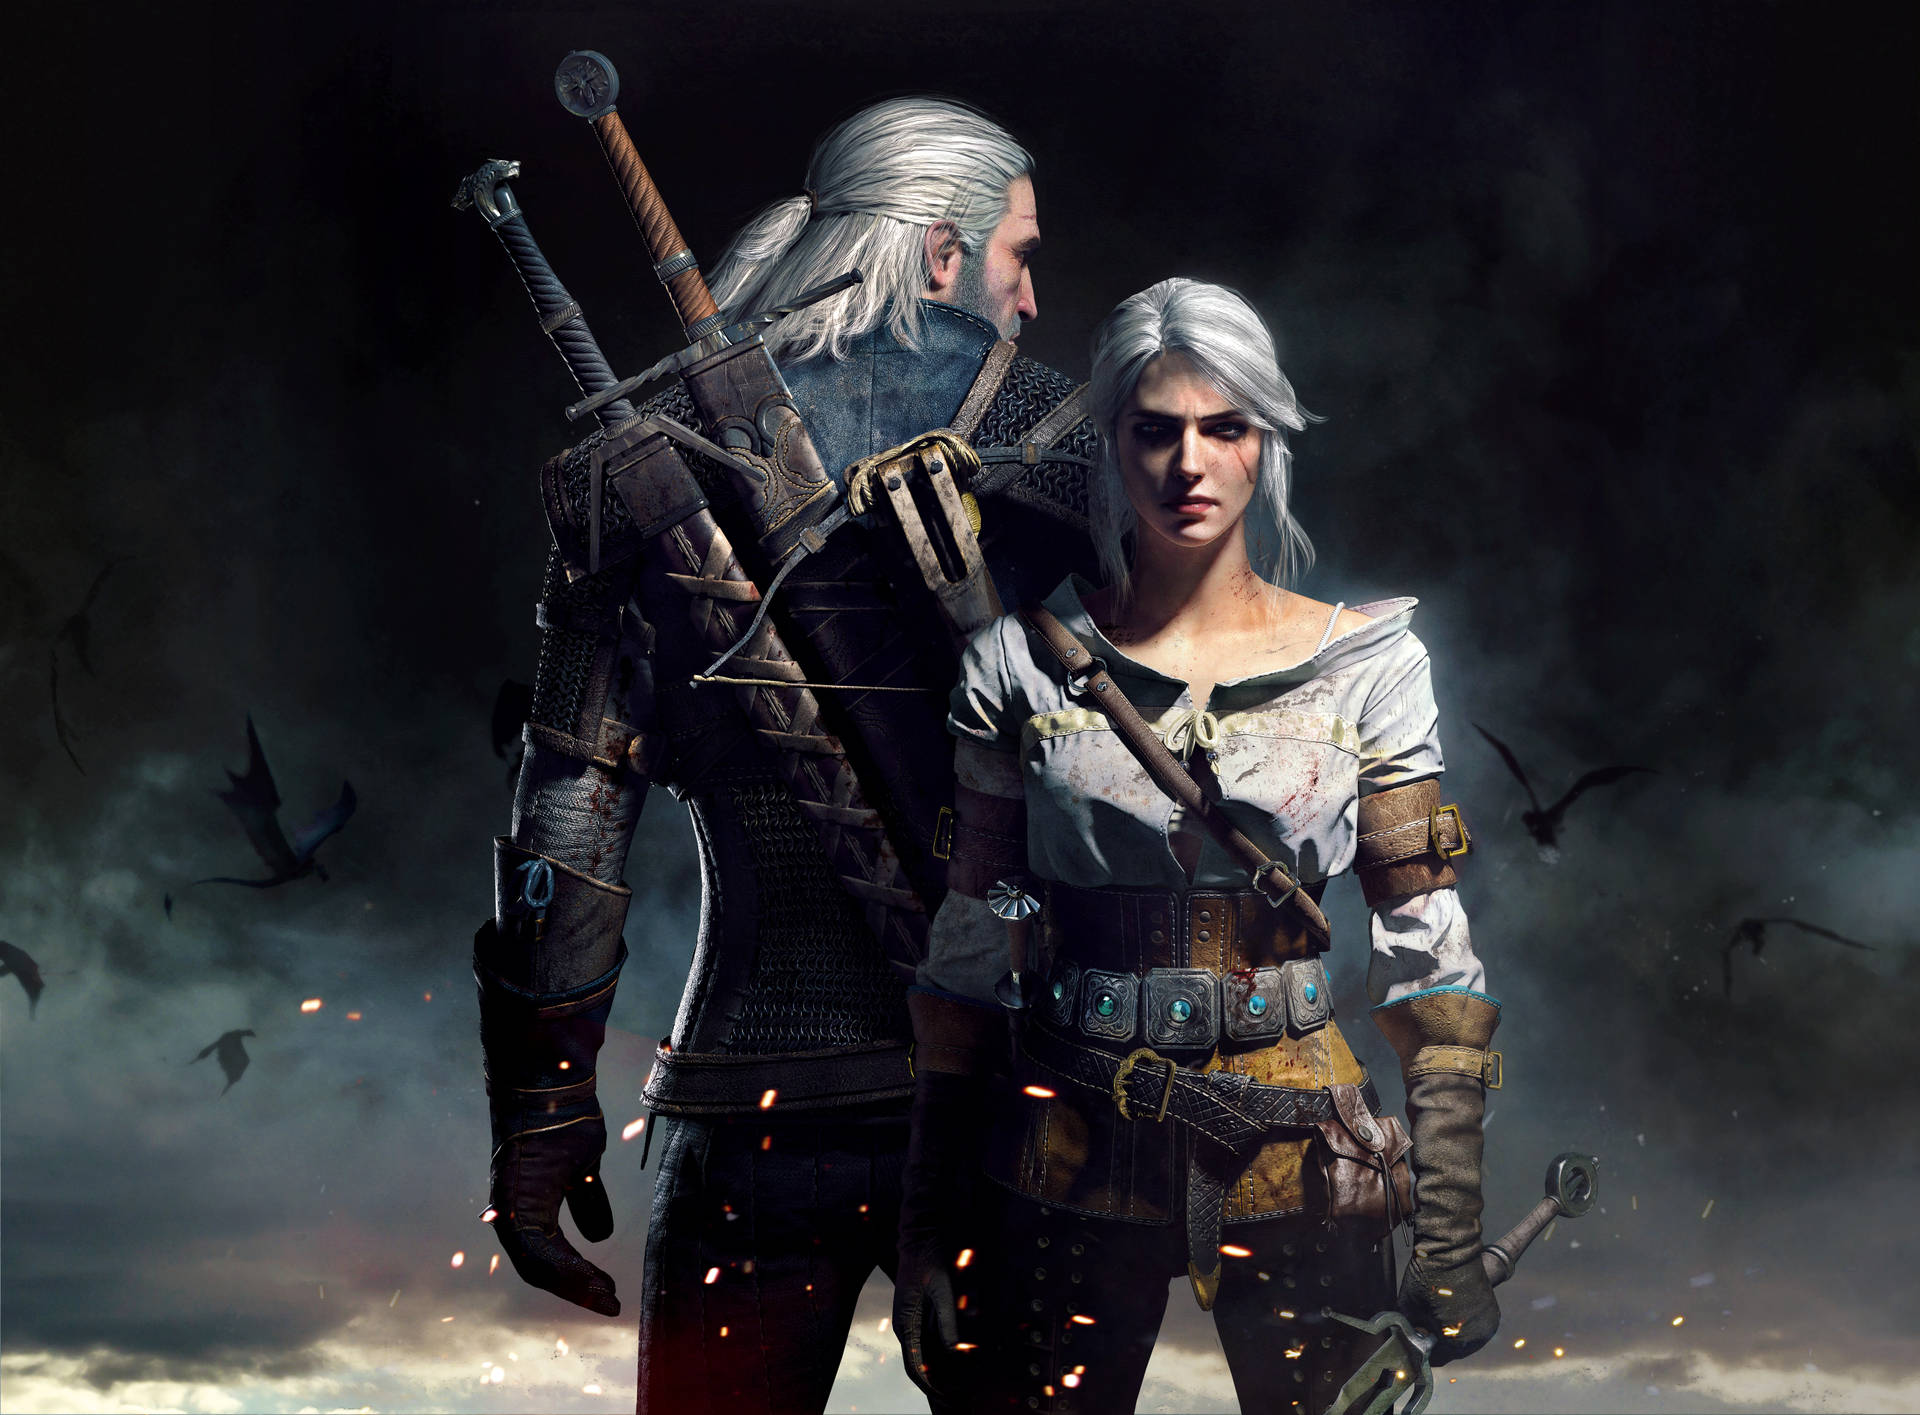 The Witcher 3 - Witcher 3 Hd Wallpaper Background